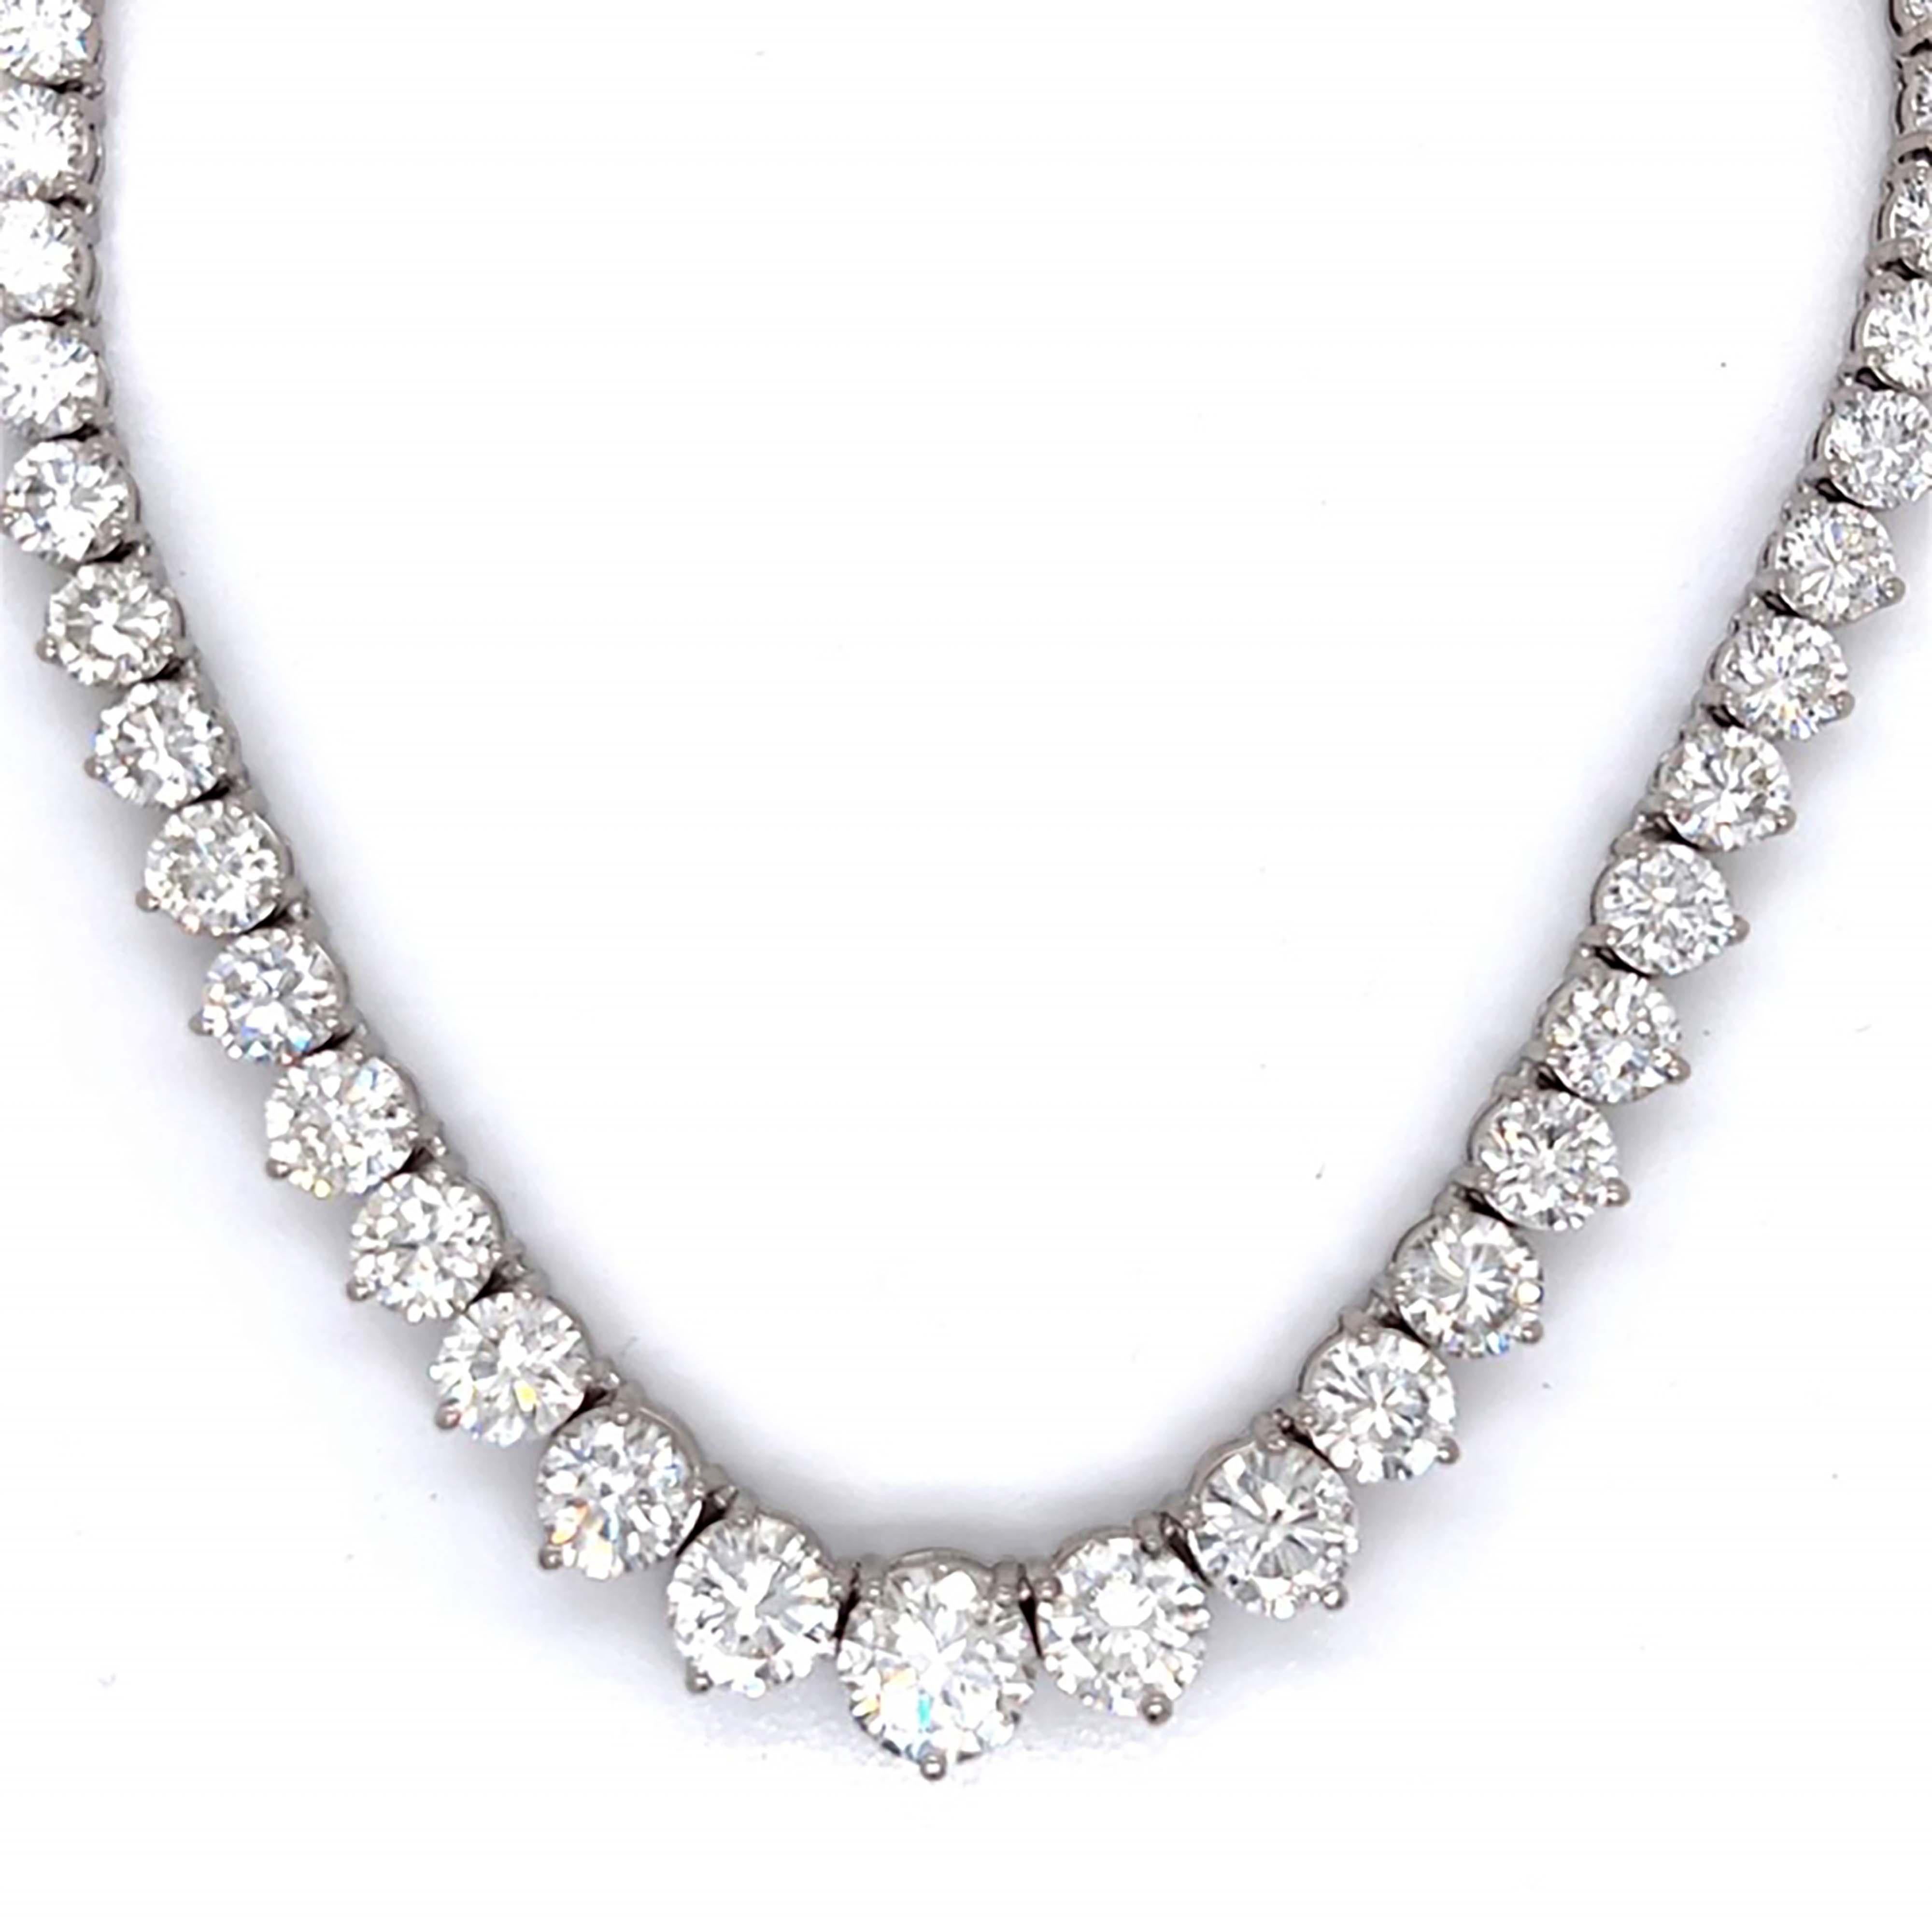 Behold an extraordinary piece of magnificence with this GIA certified 30-carat diamond tennis necklace. Each facet of this opulent necklace is a testament to exquisite craftsmanship and timeless beauty.

Glistening at the heart of this masterpiece